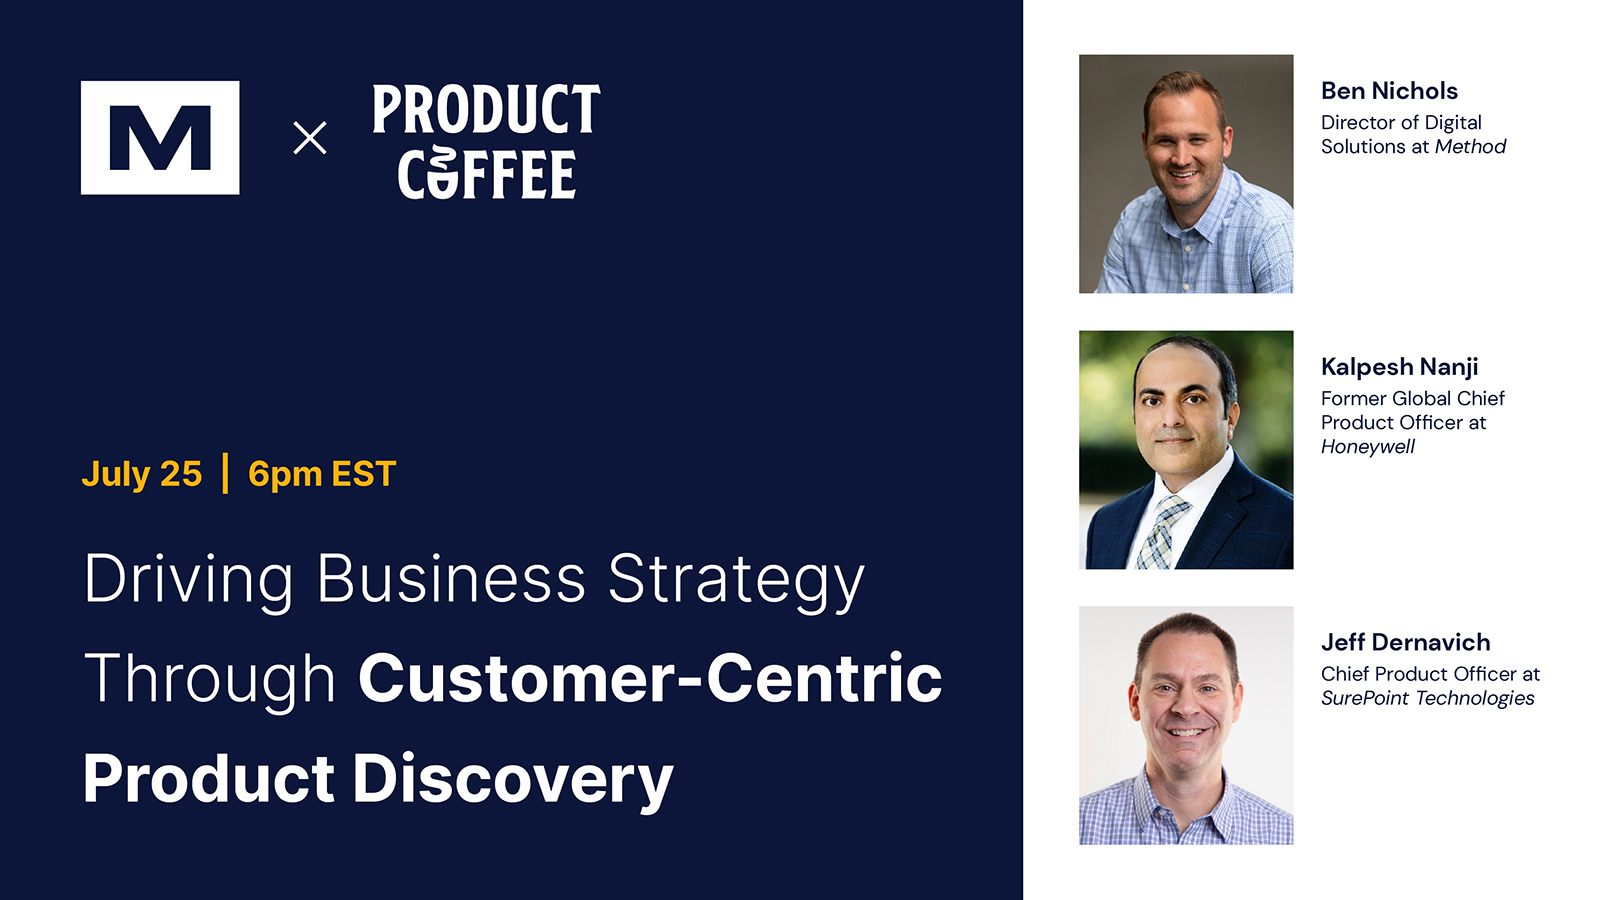 Driving Business Strategy Through Customer-Centric Product Discovery